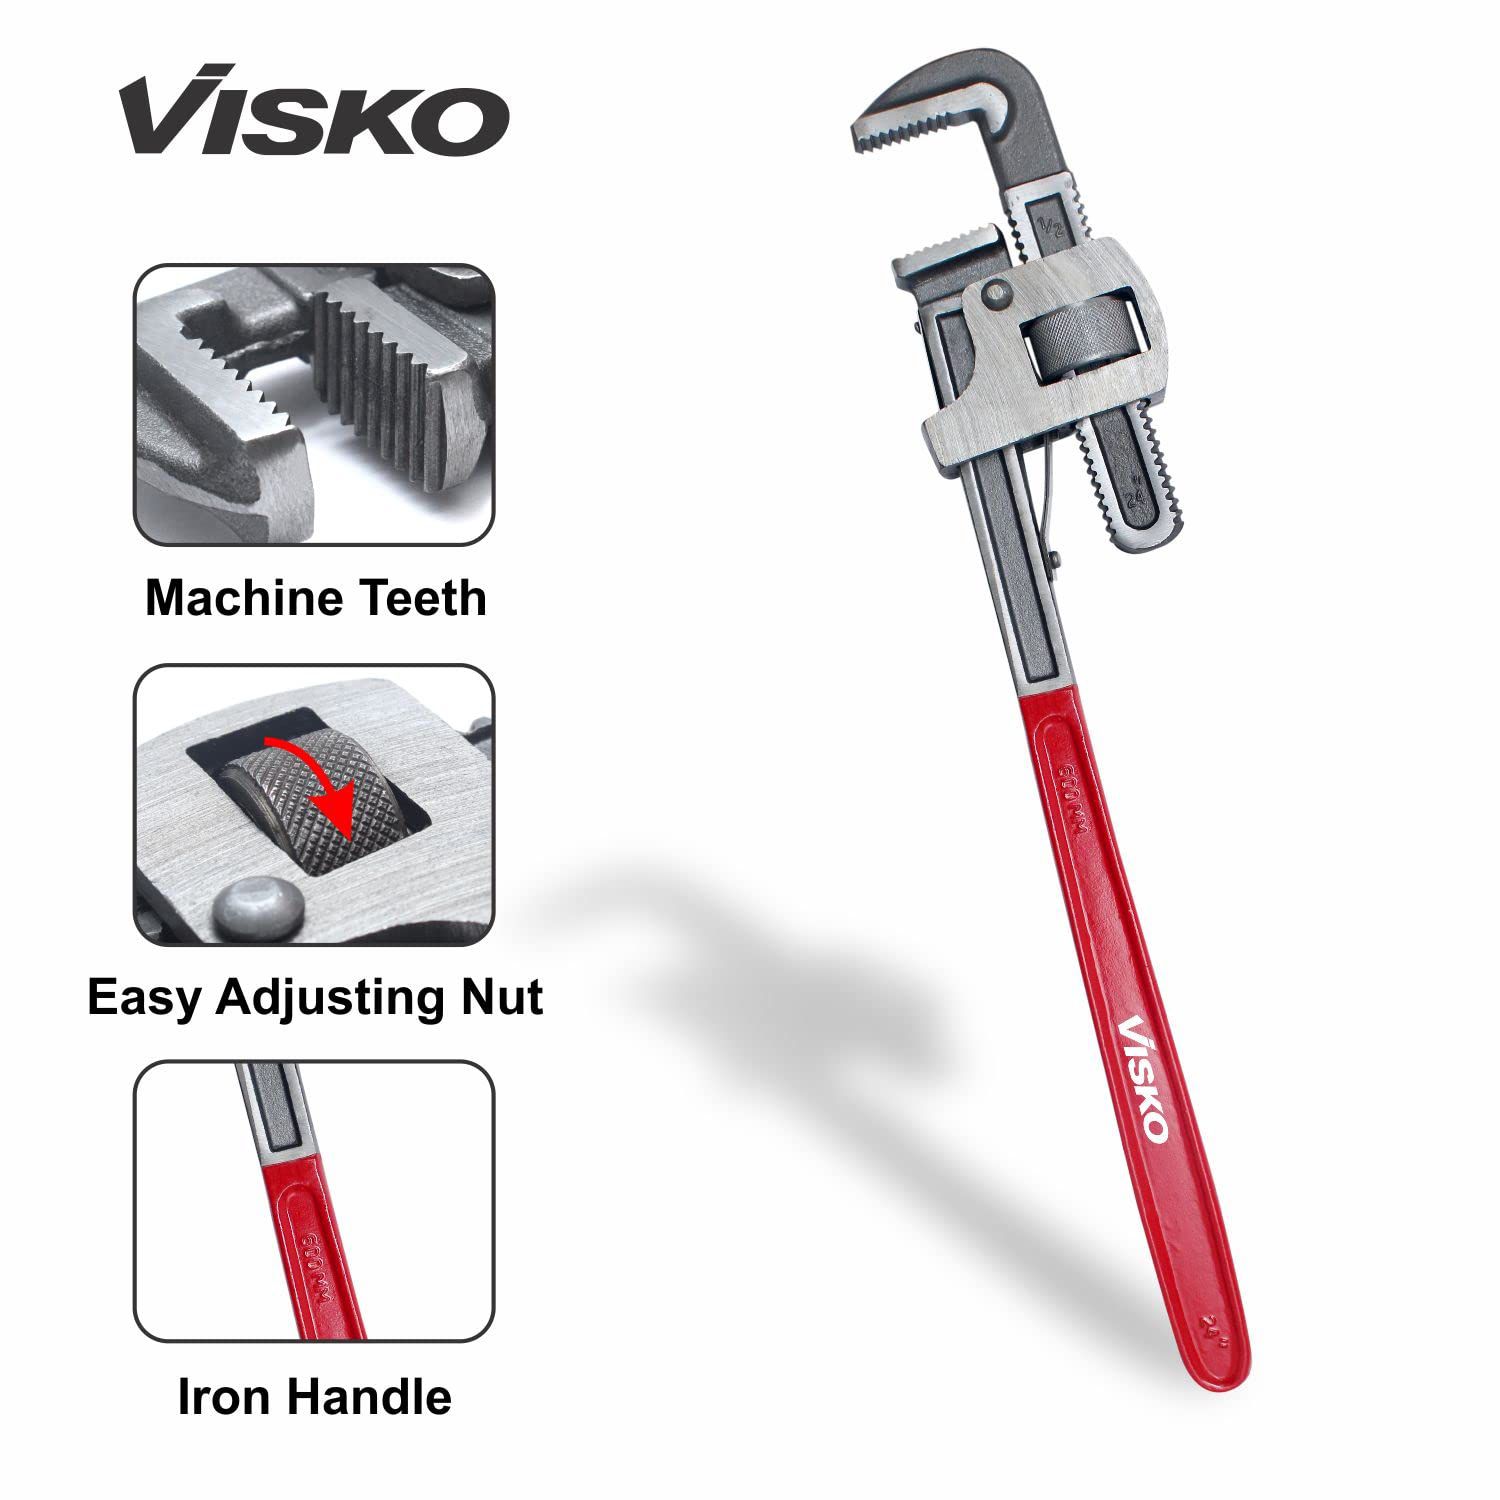 Visko Tools 402 18 Pipe Wrench, RED, 18 inches